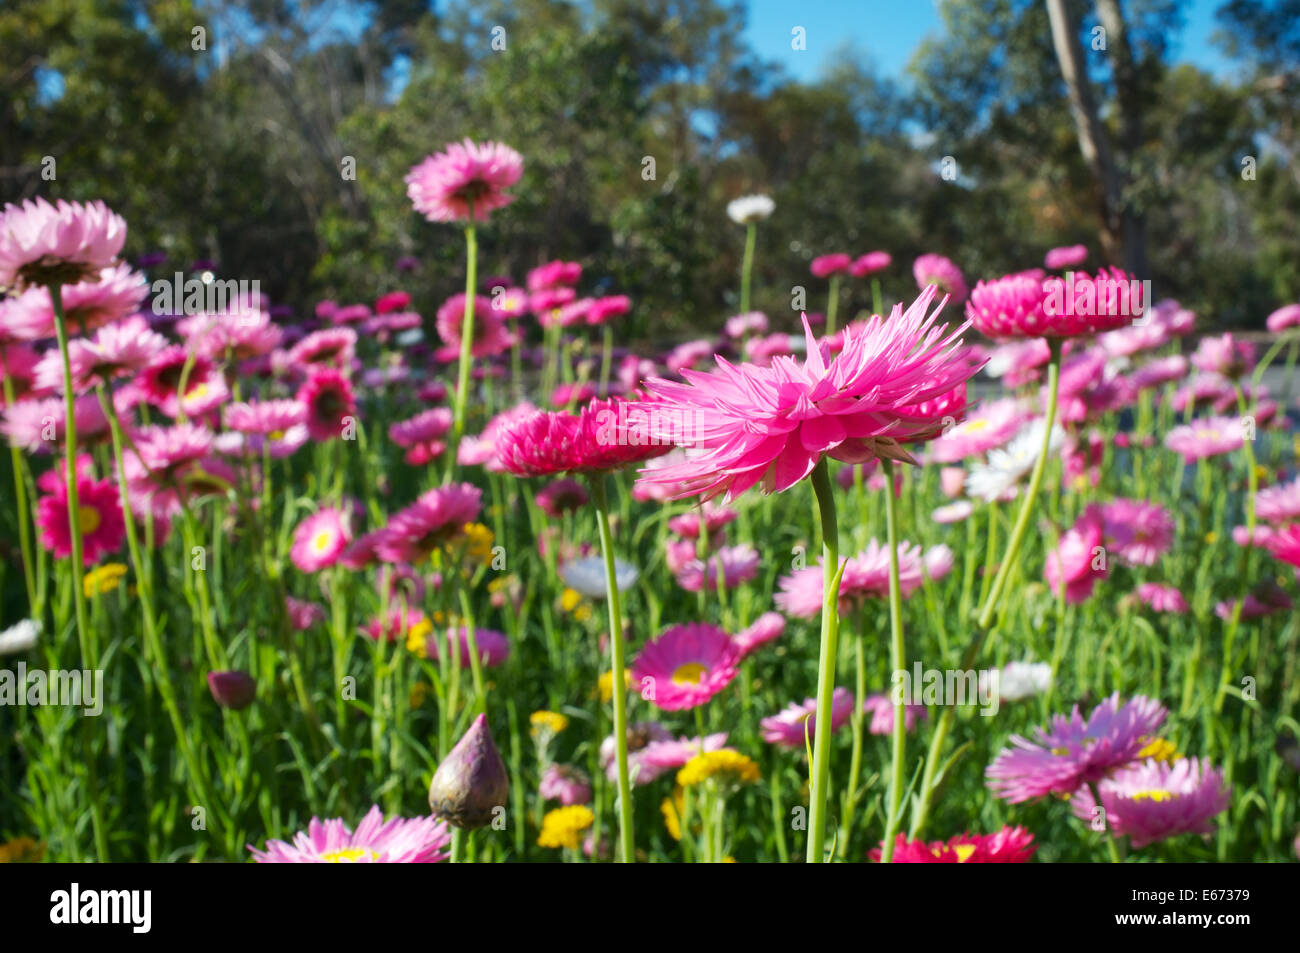 Spring wildflowers in King's Park, Perth, Western Australia Stock Photo